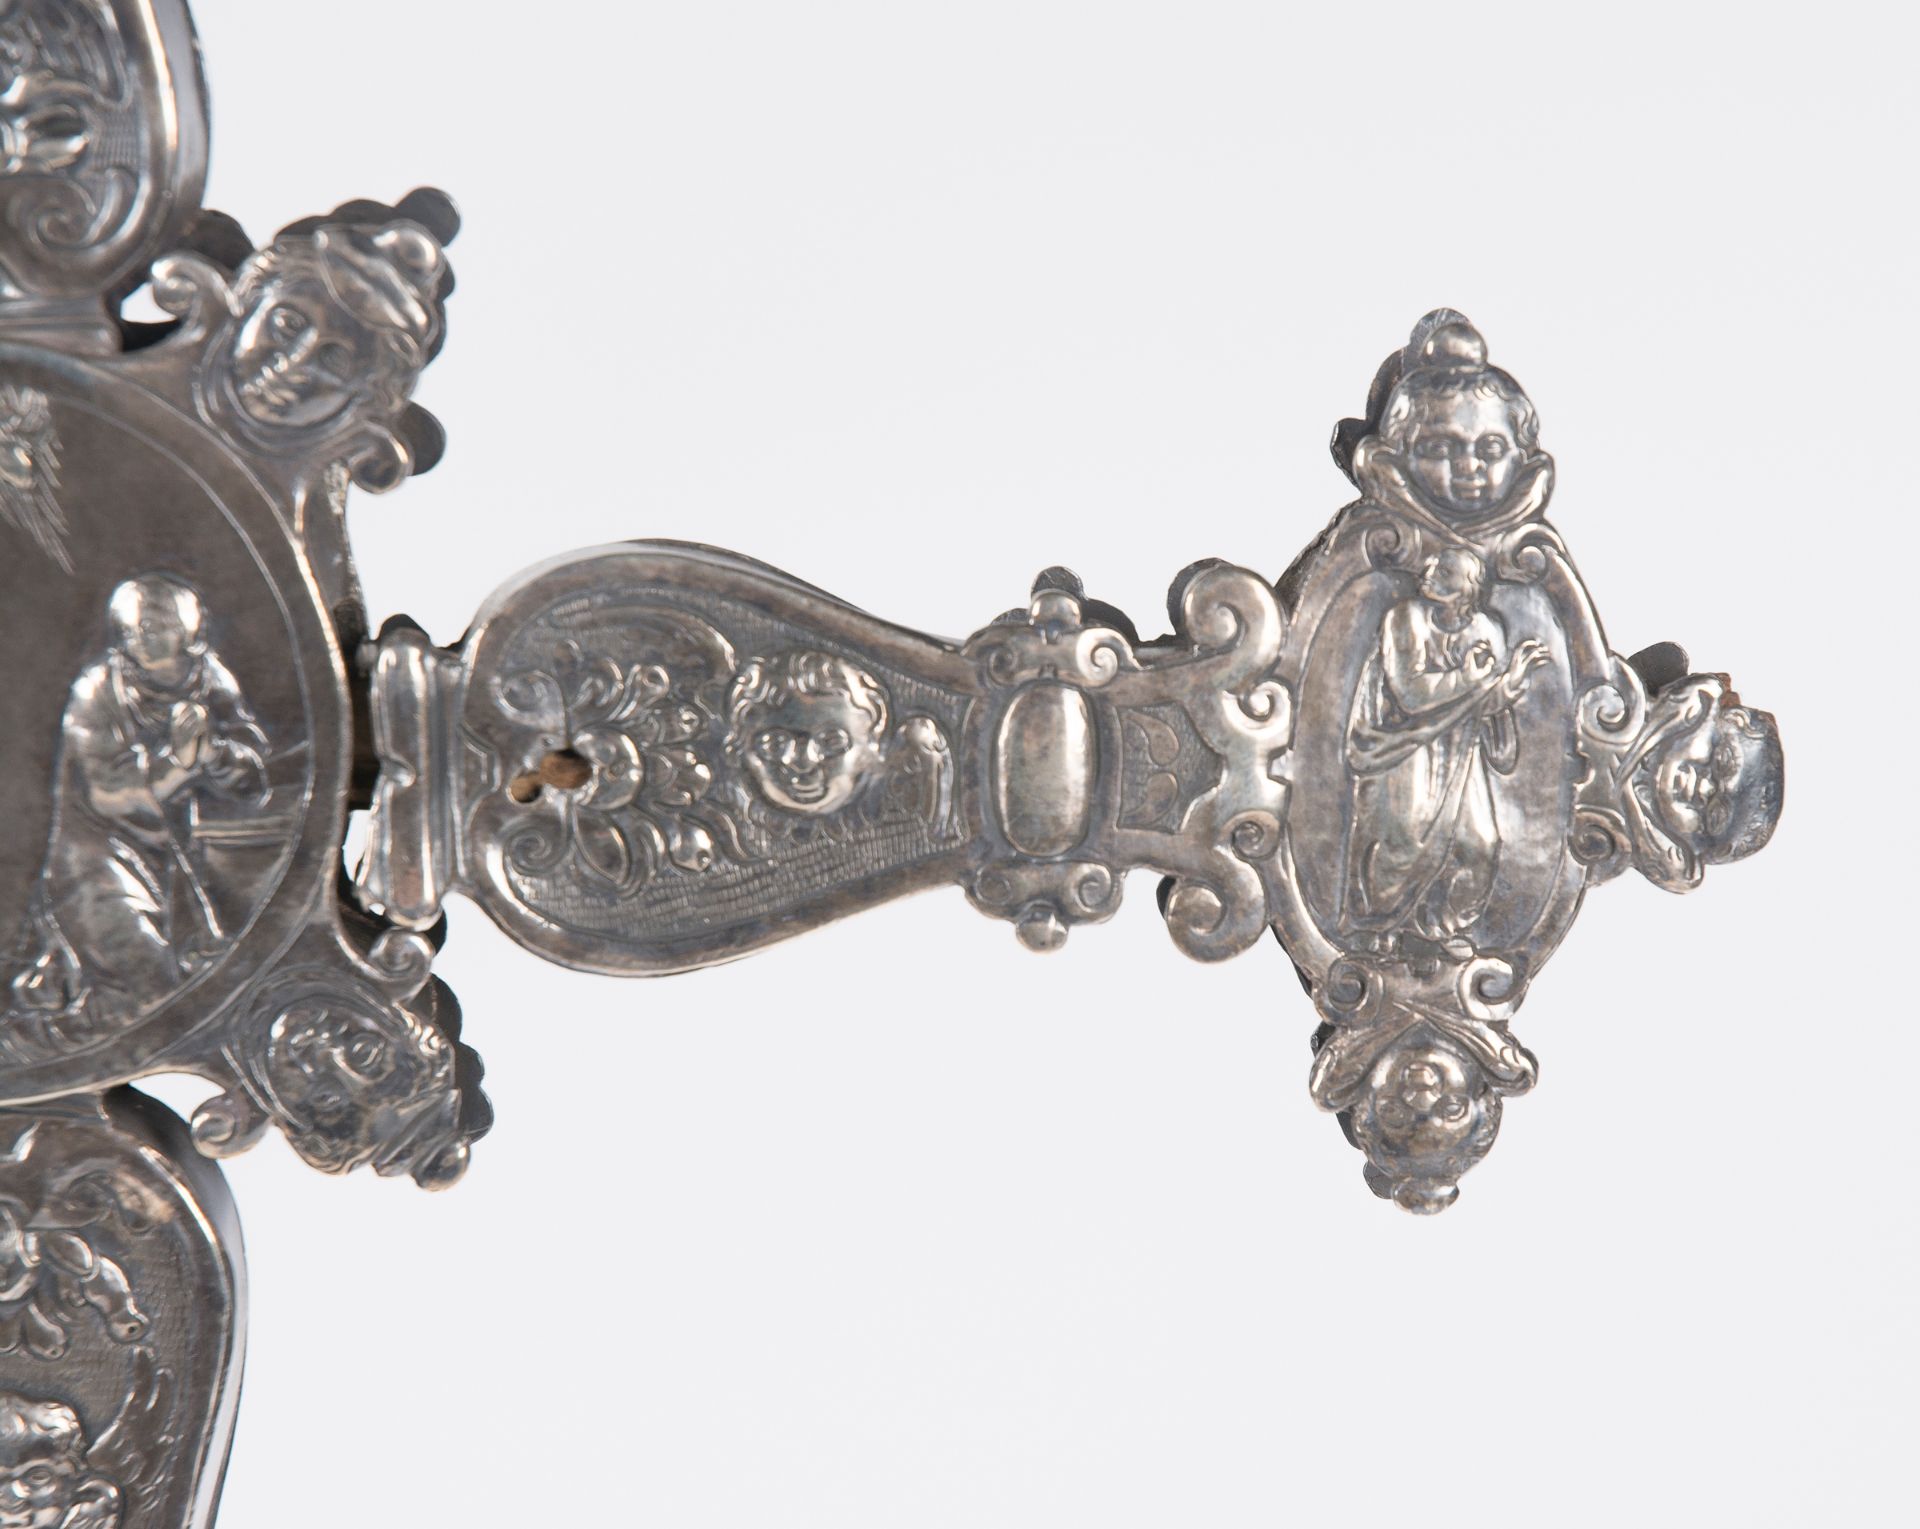 Large, chased silver processional cross. 16th century. - Image 4 of 14